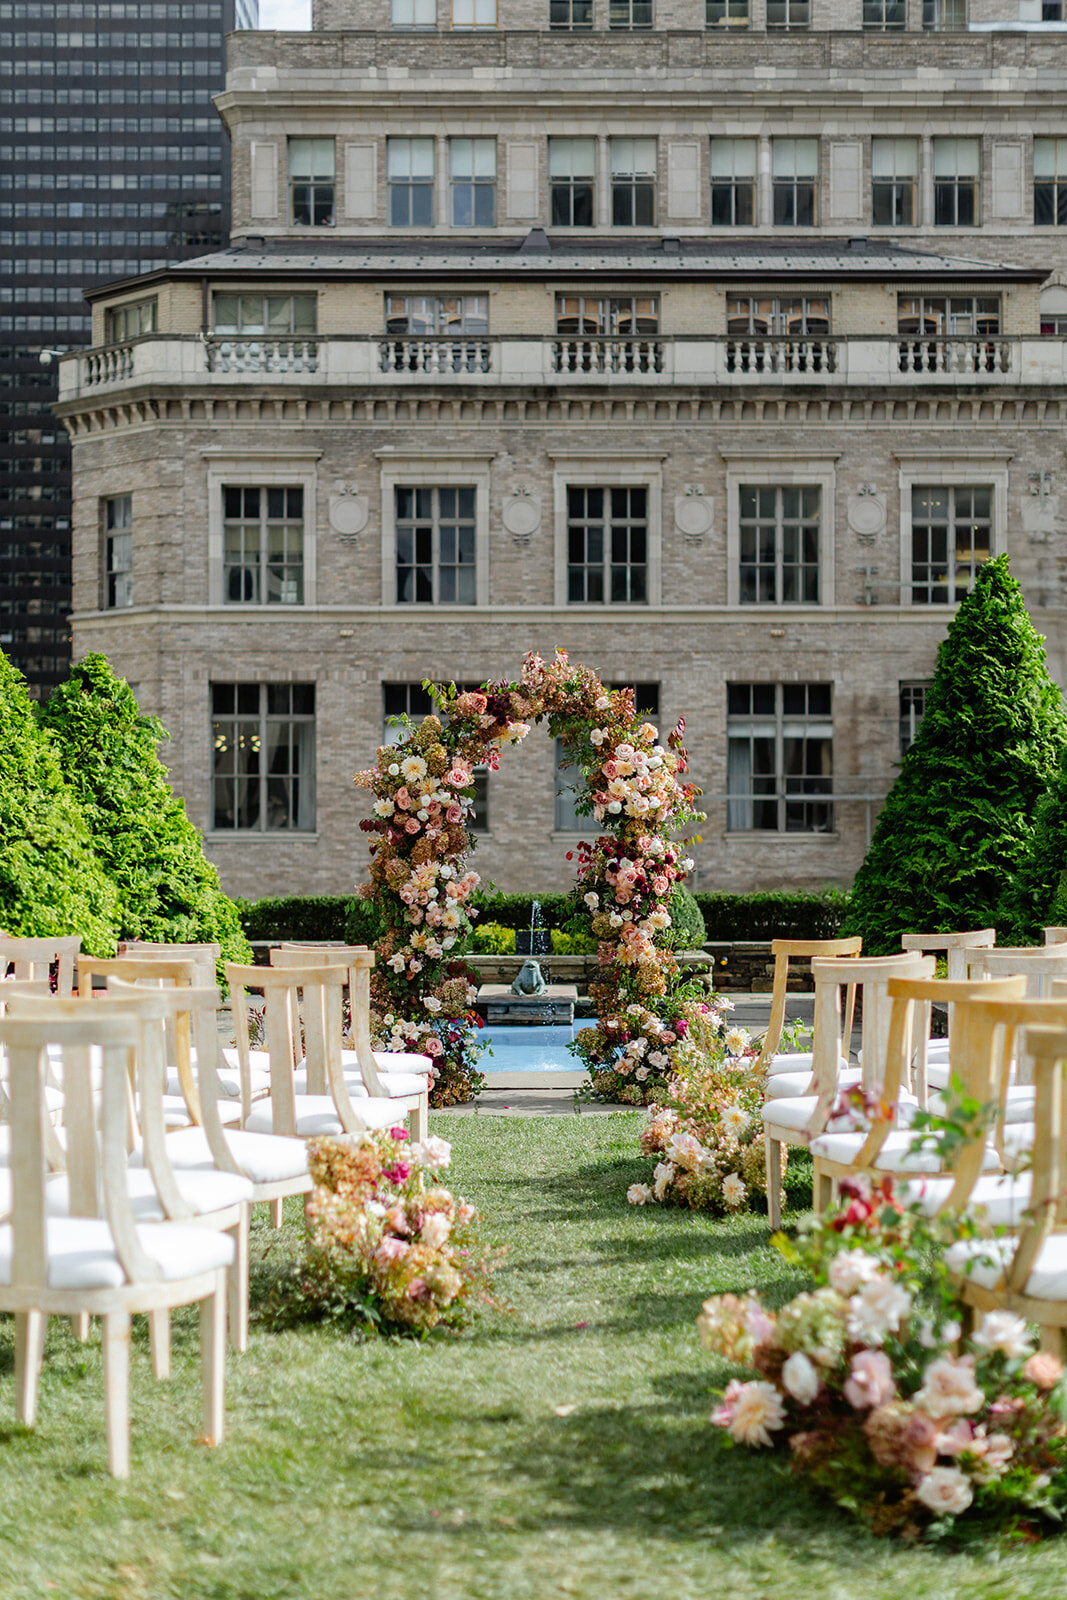 A beautiful, rooftop wedding at 620 Loft & Garden photographed by Lorin Kelly